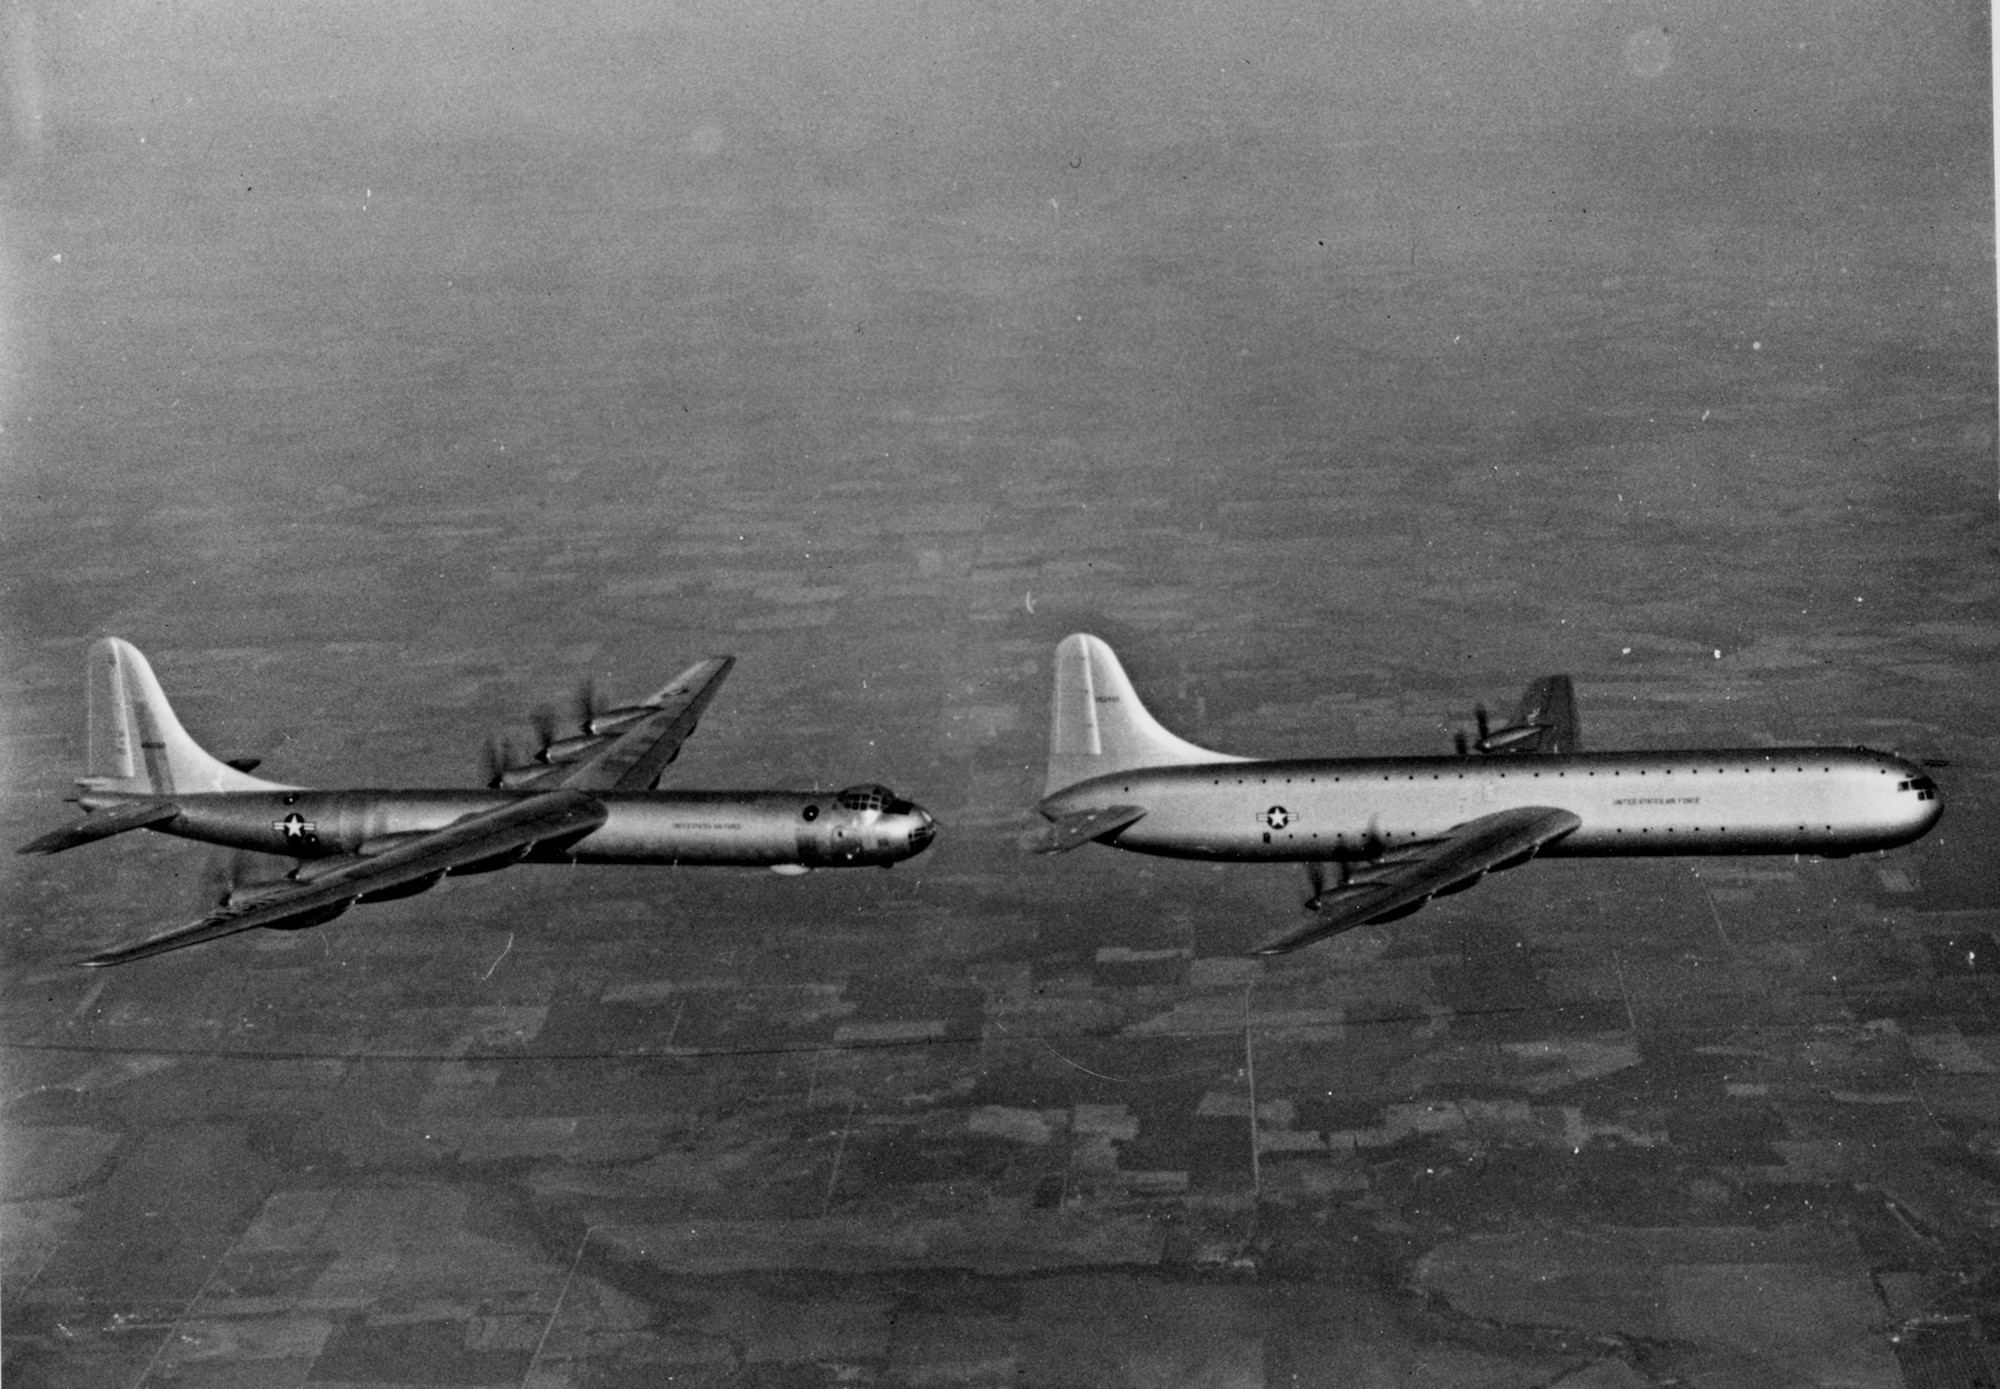 XC-99 in flight with a B-36. (U.S. Air Force photo).